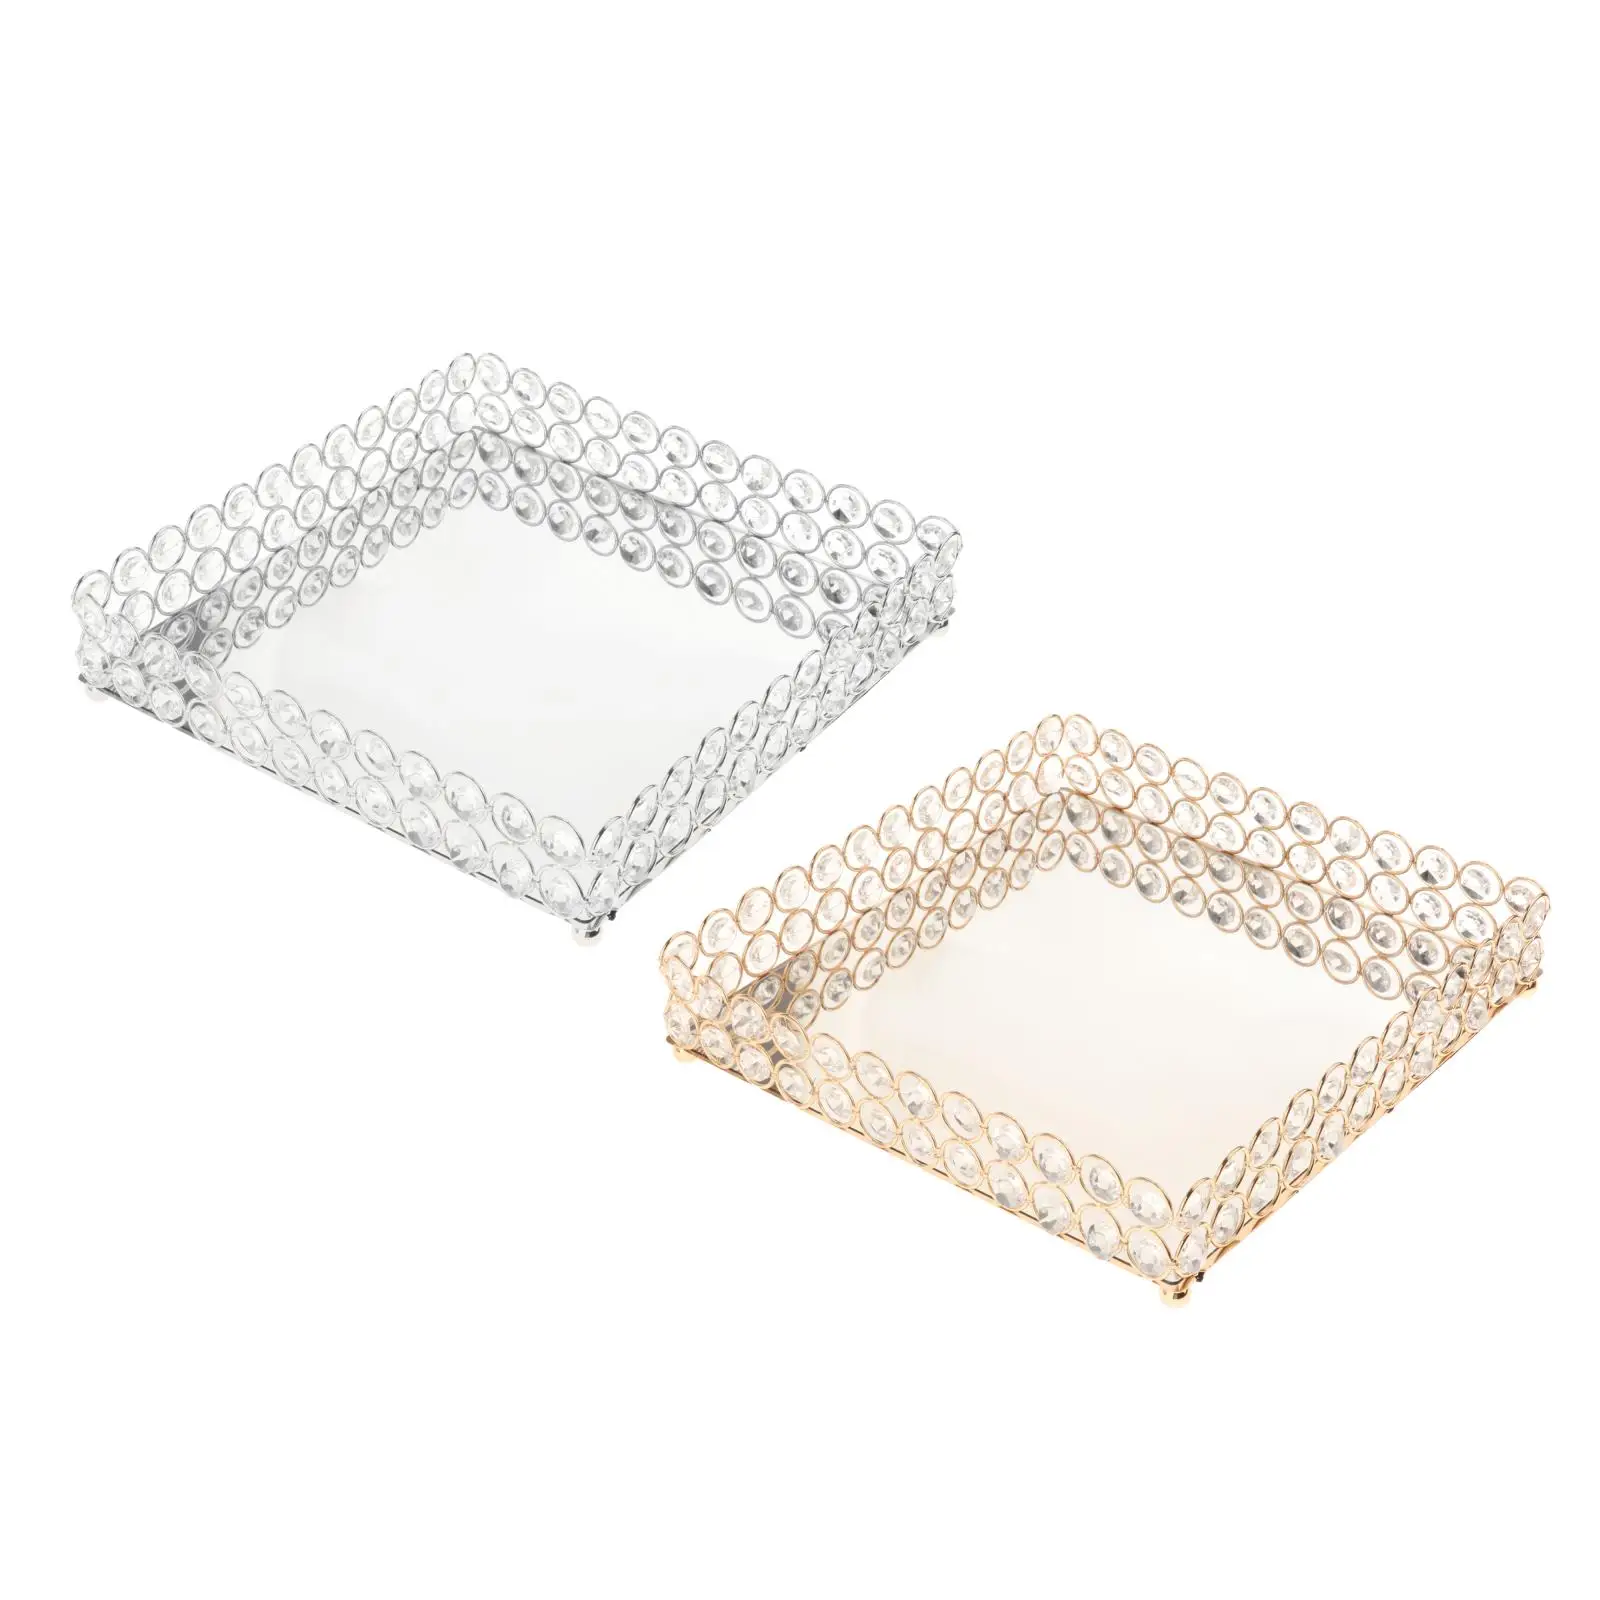 Crystal Cosmetic Makeup Tray 10.6 inches Large Square Vanity Tray Jewelry Trinket Organizer Tray Mirrored Decorative Trays